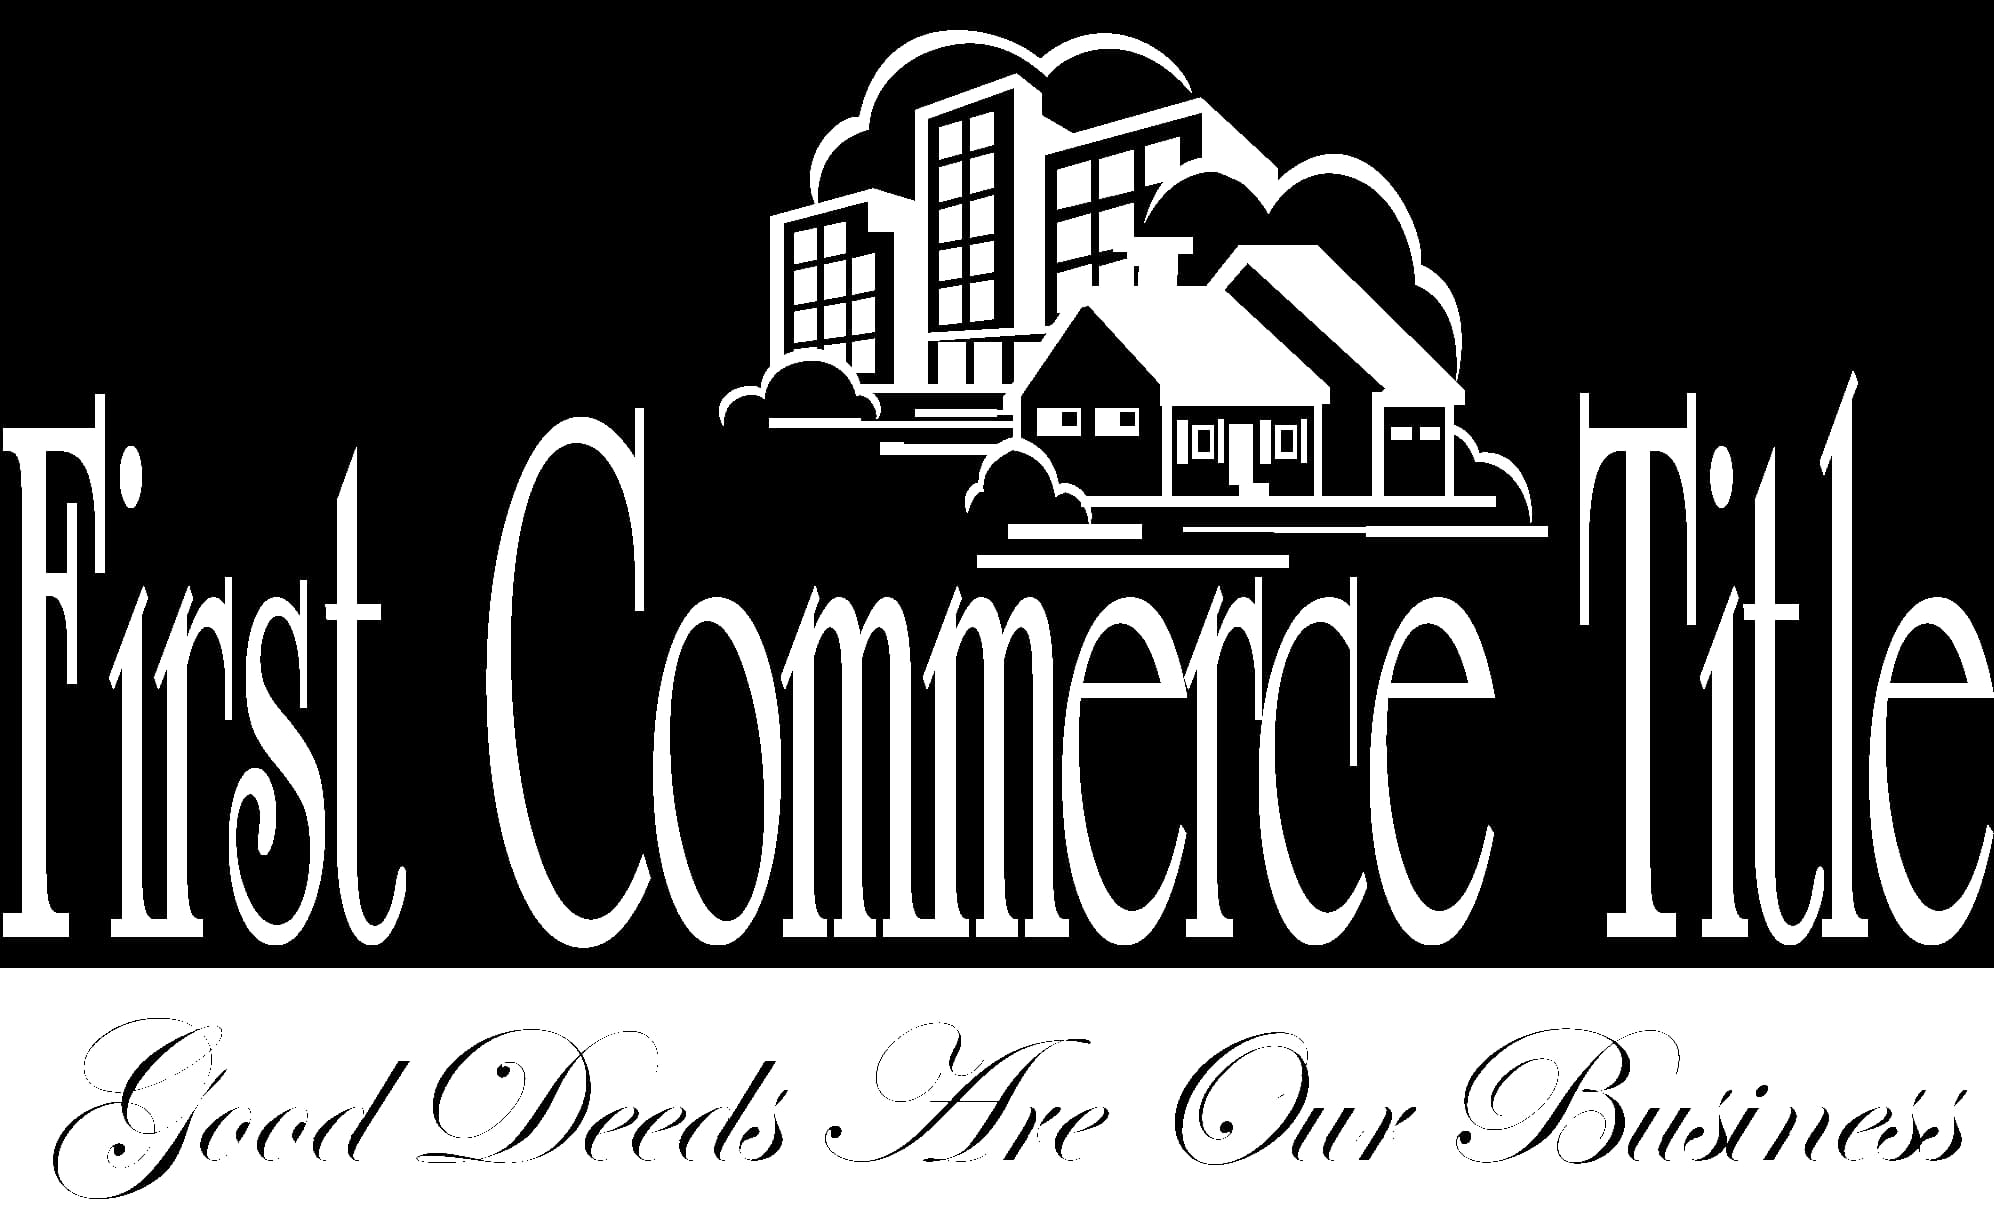 First Title Commerce